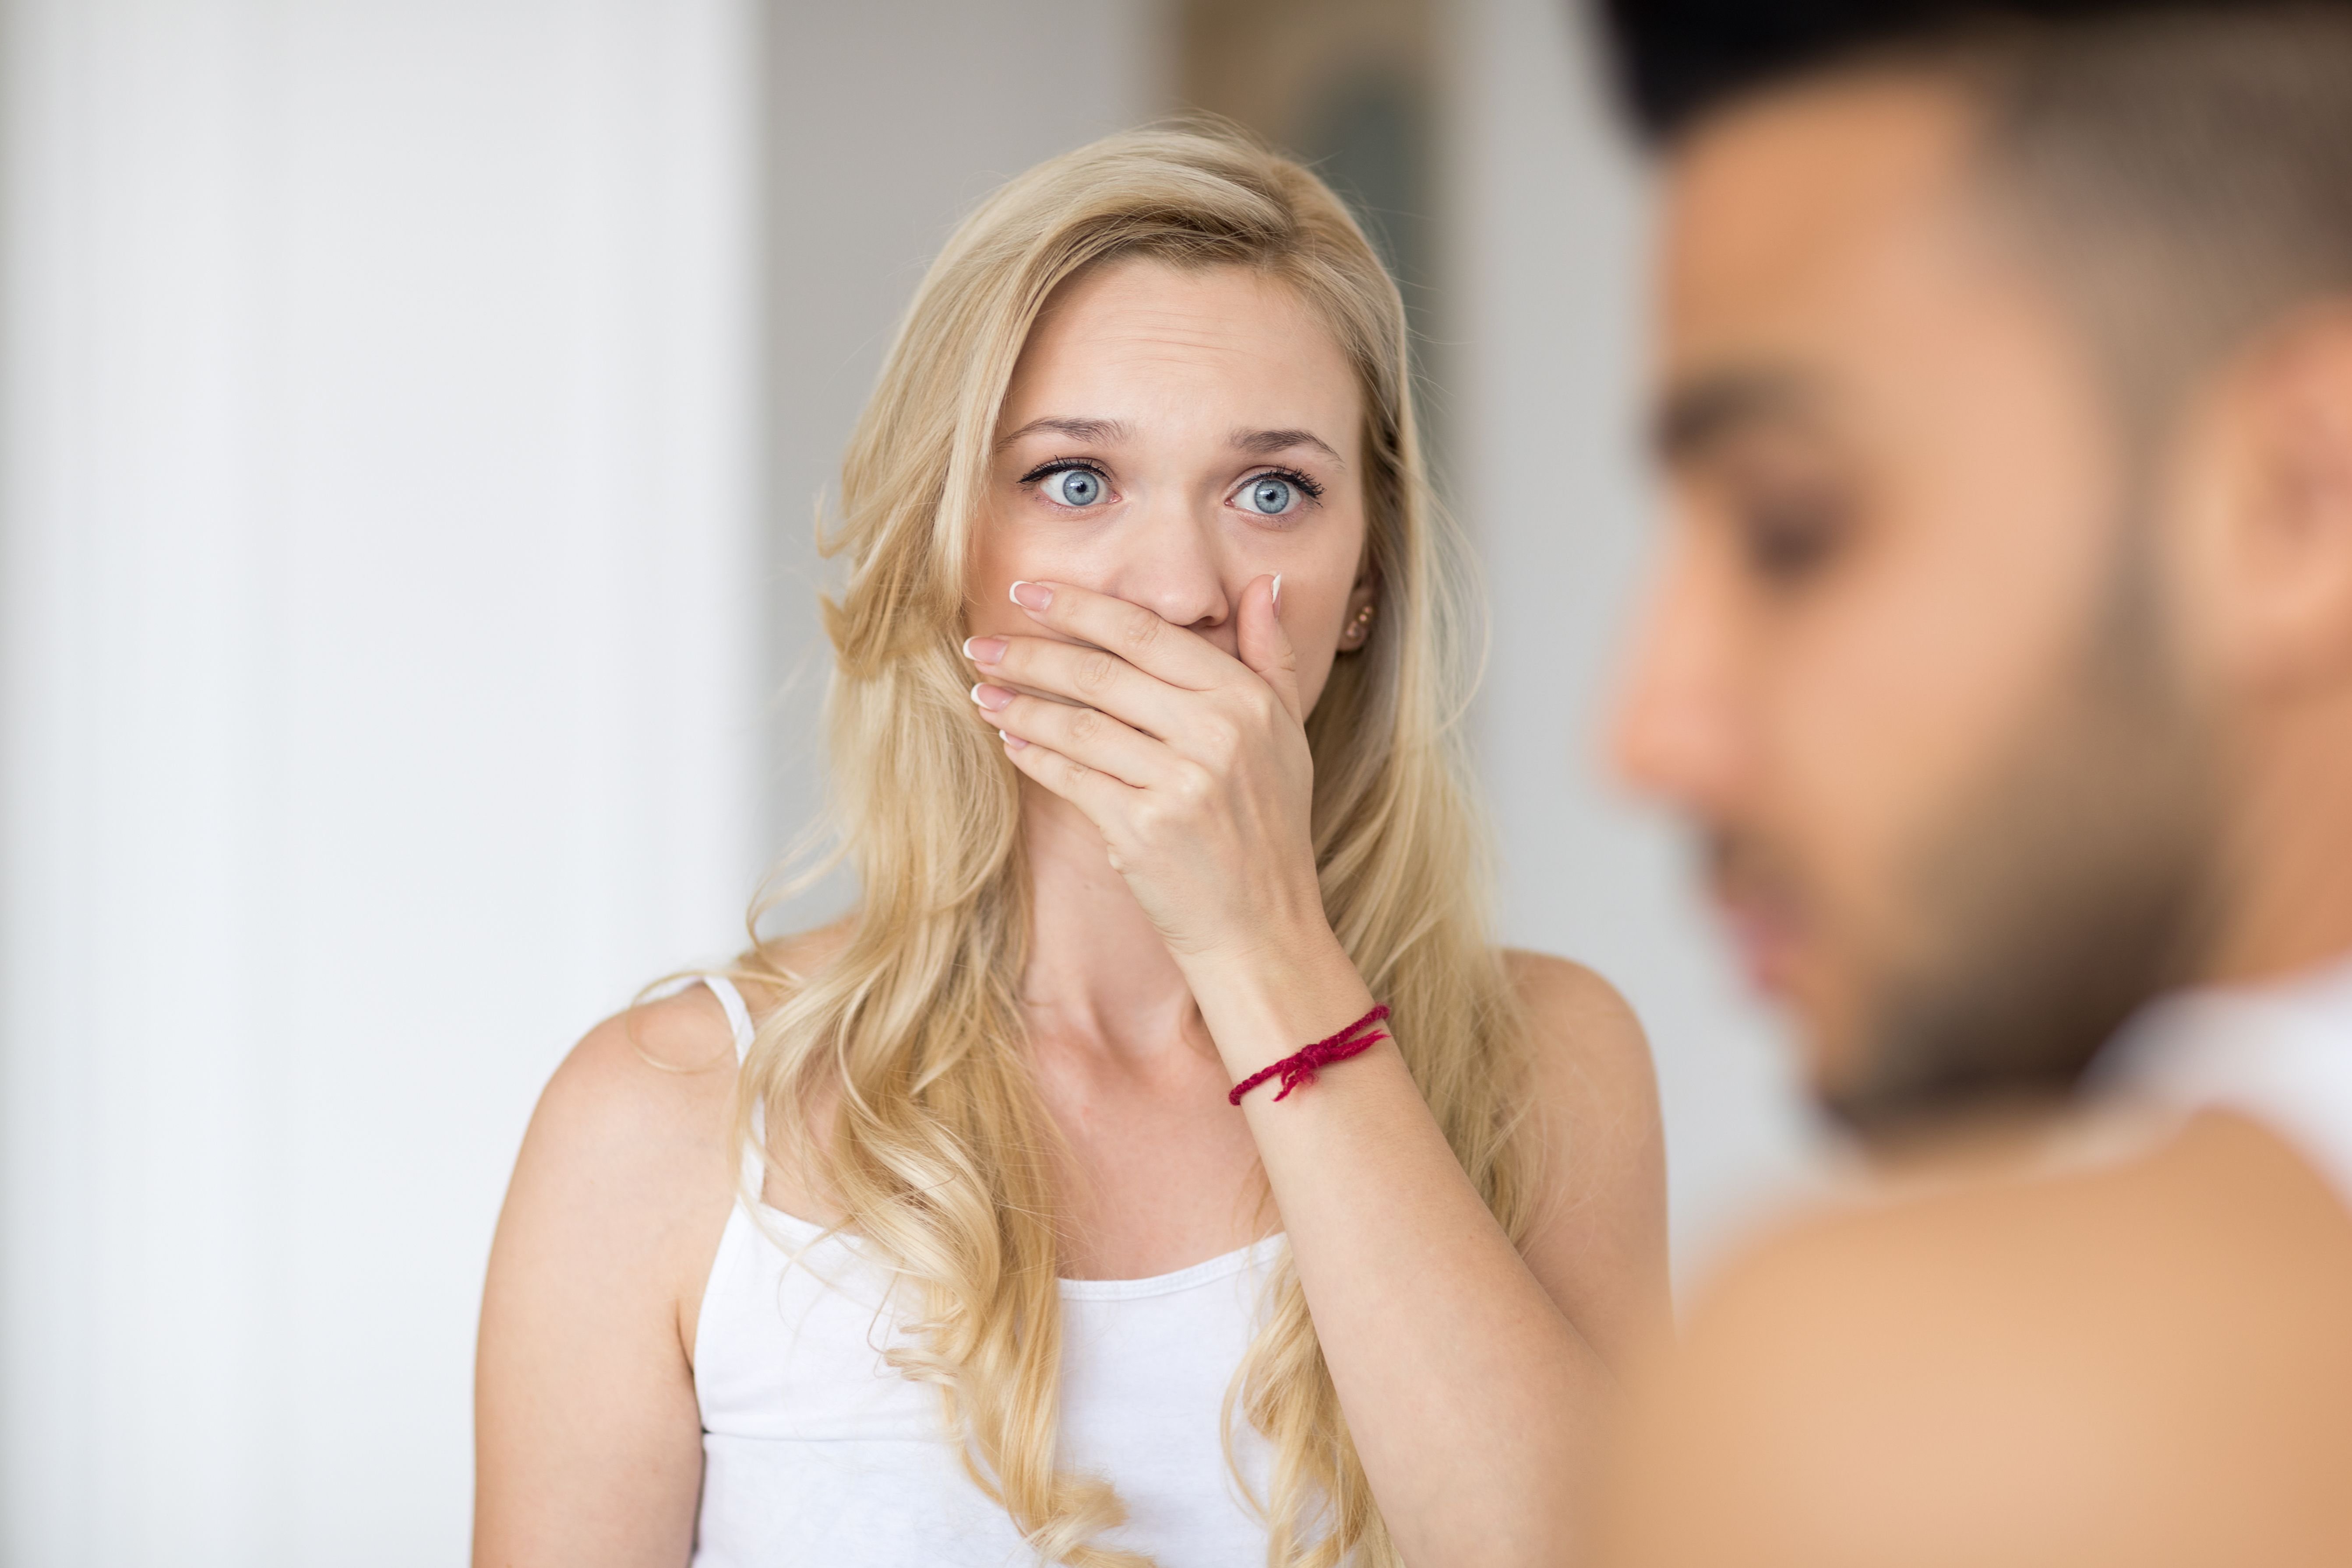 A woman looks shocked while looking at a man. | Source: Shutterstock